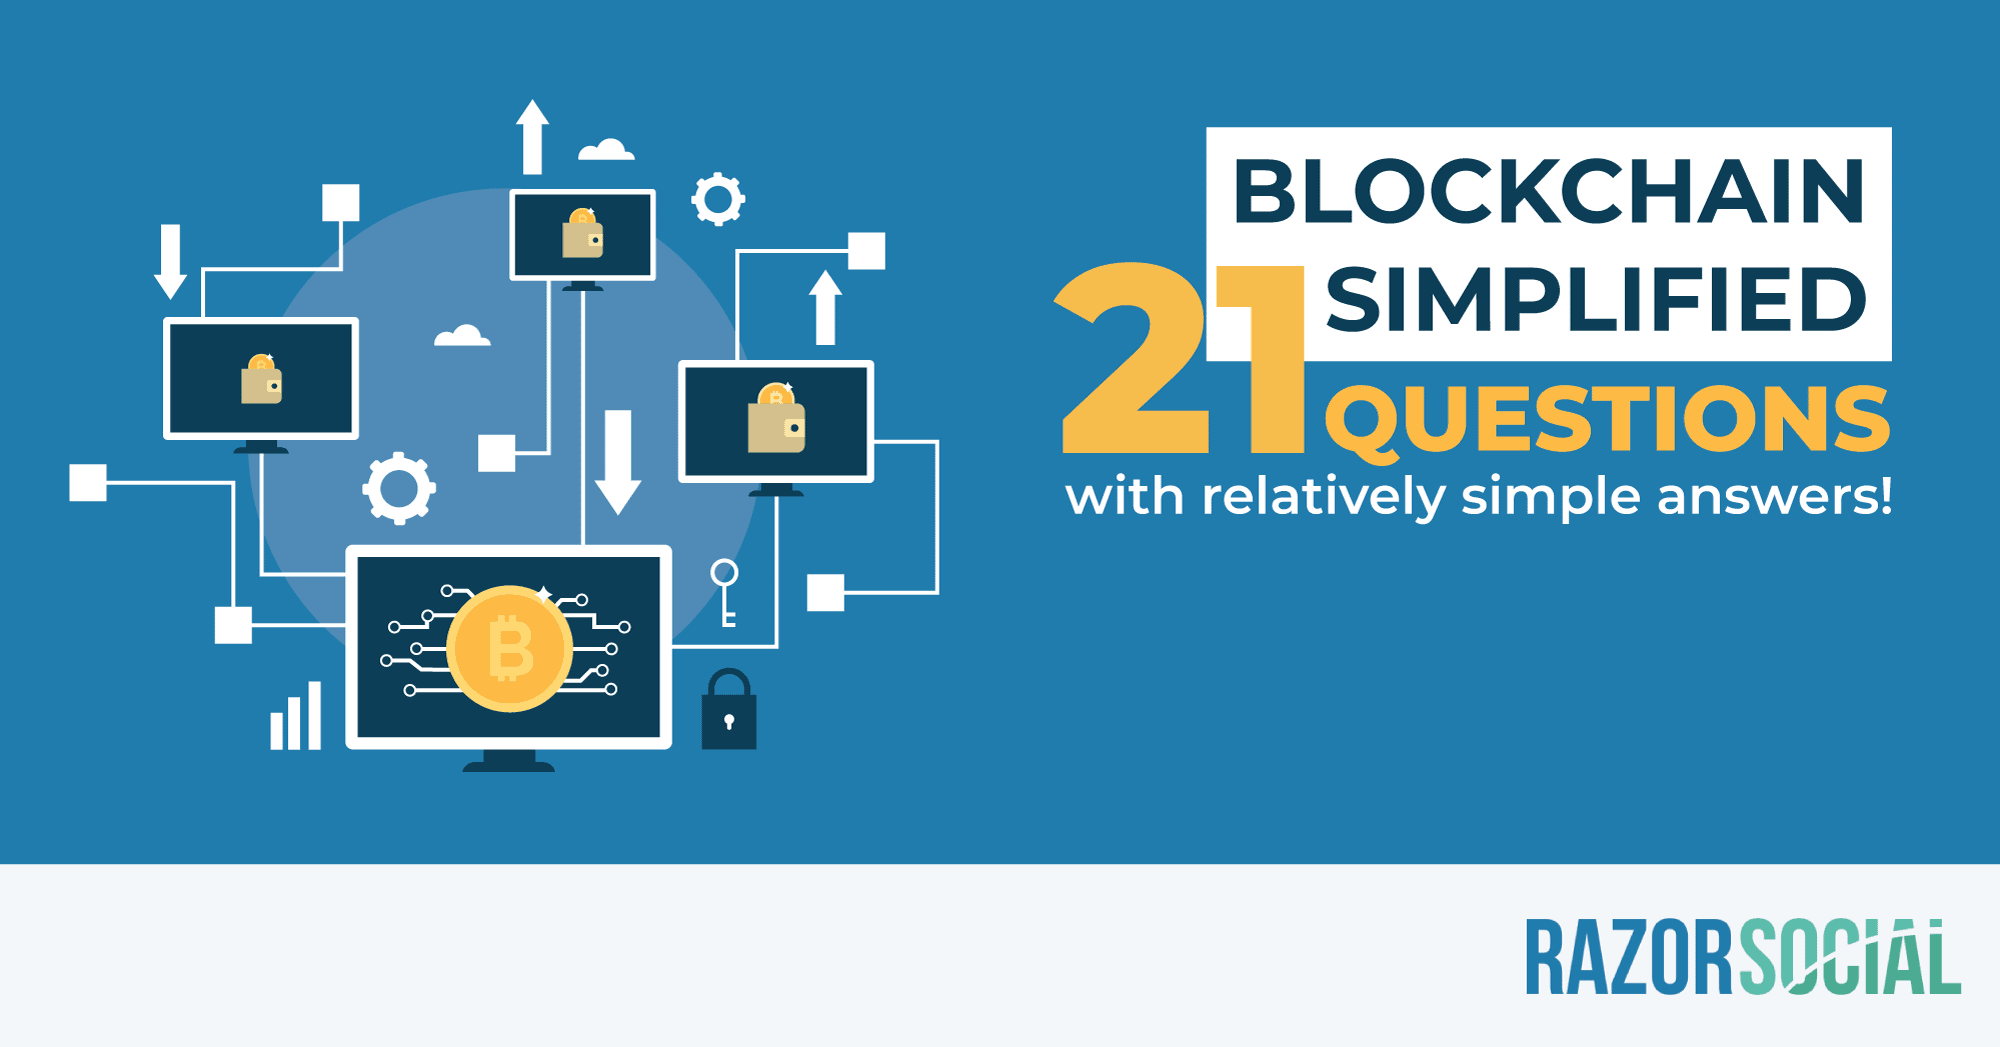 Blockchain Simplified: 21 Questions with relatively simply answers!